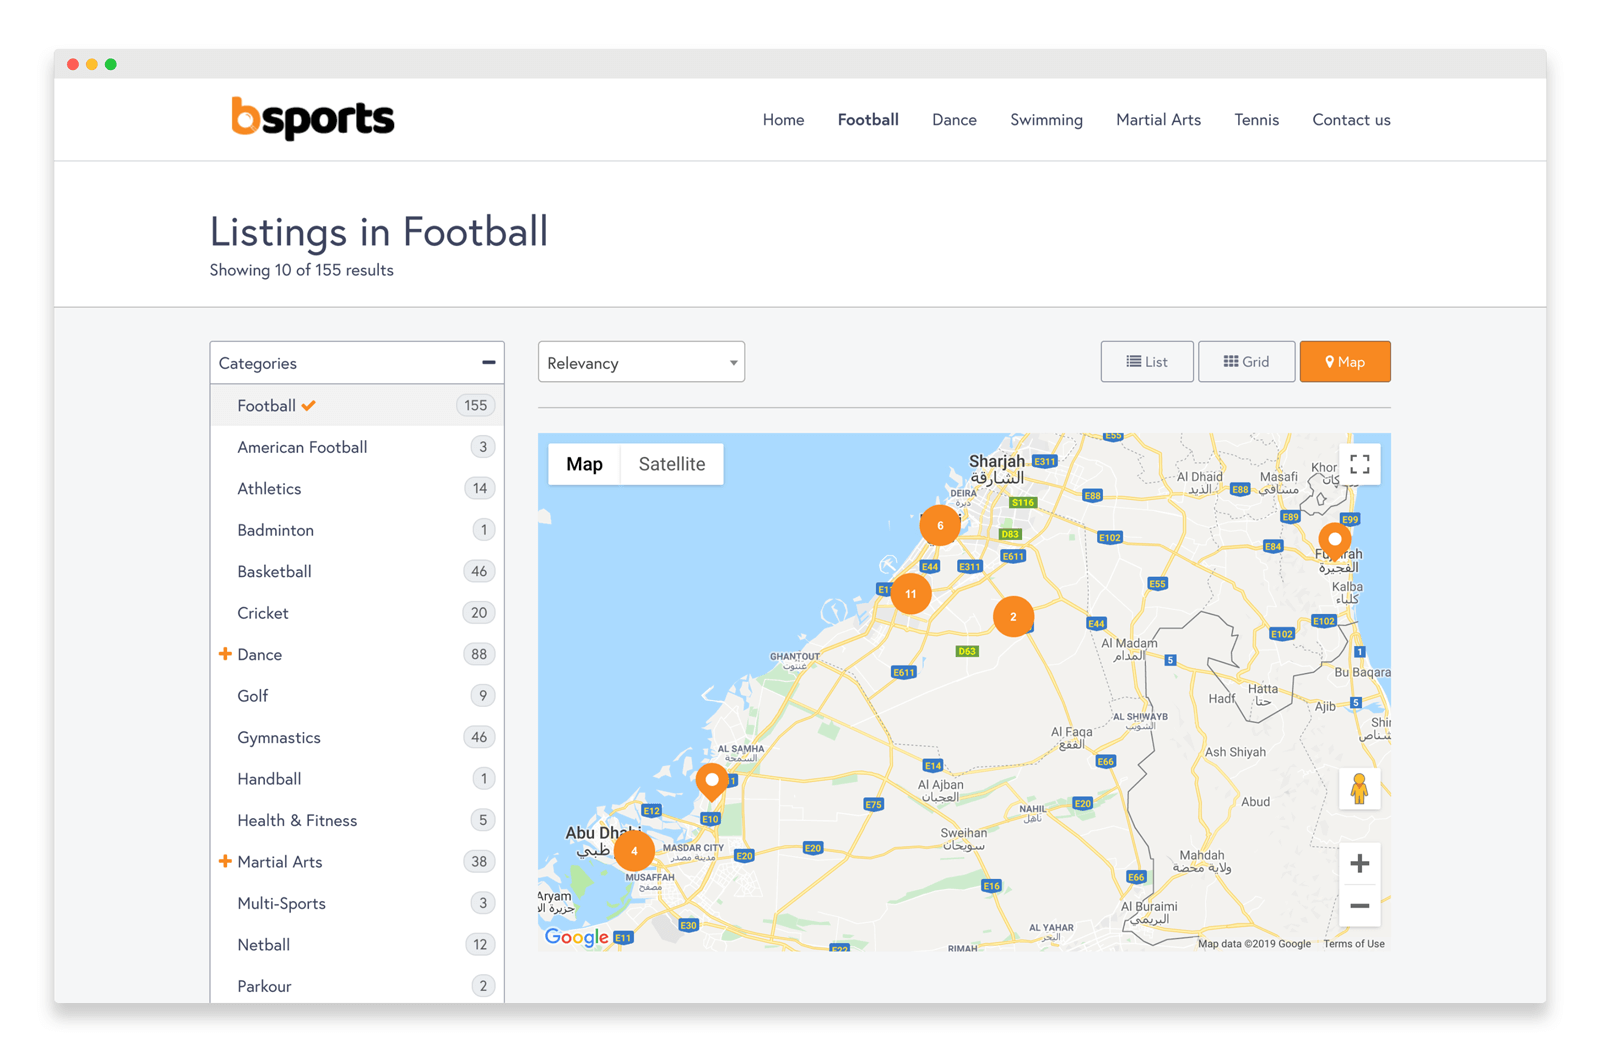 bsports search results page.